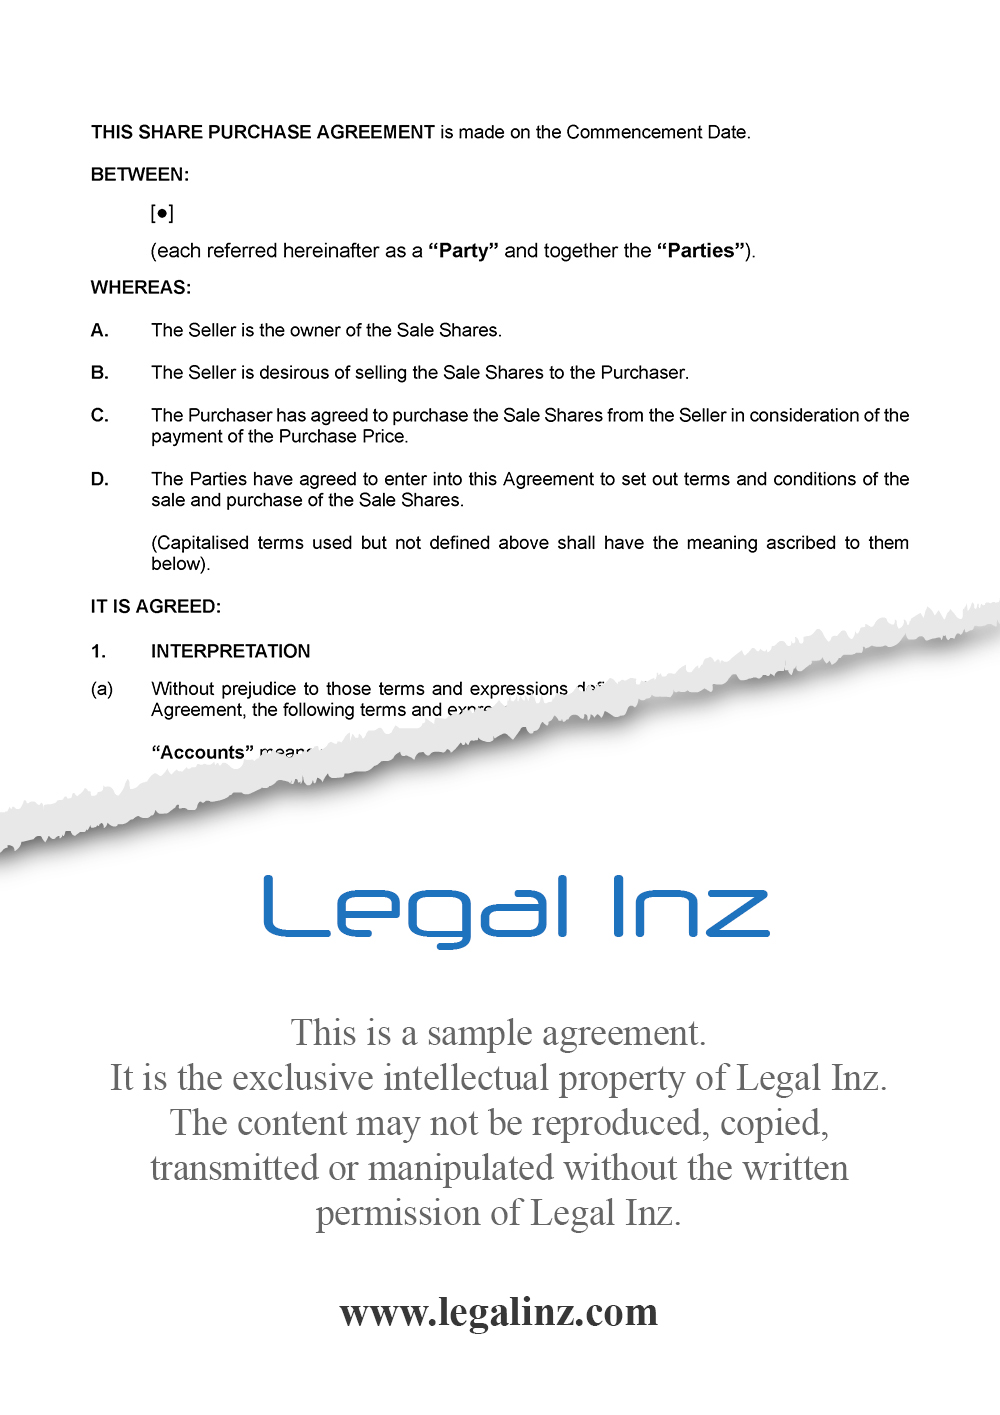 Share Purchase Agreement Sample 1